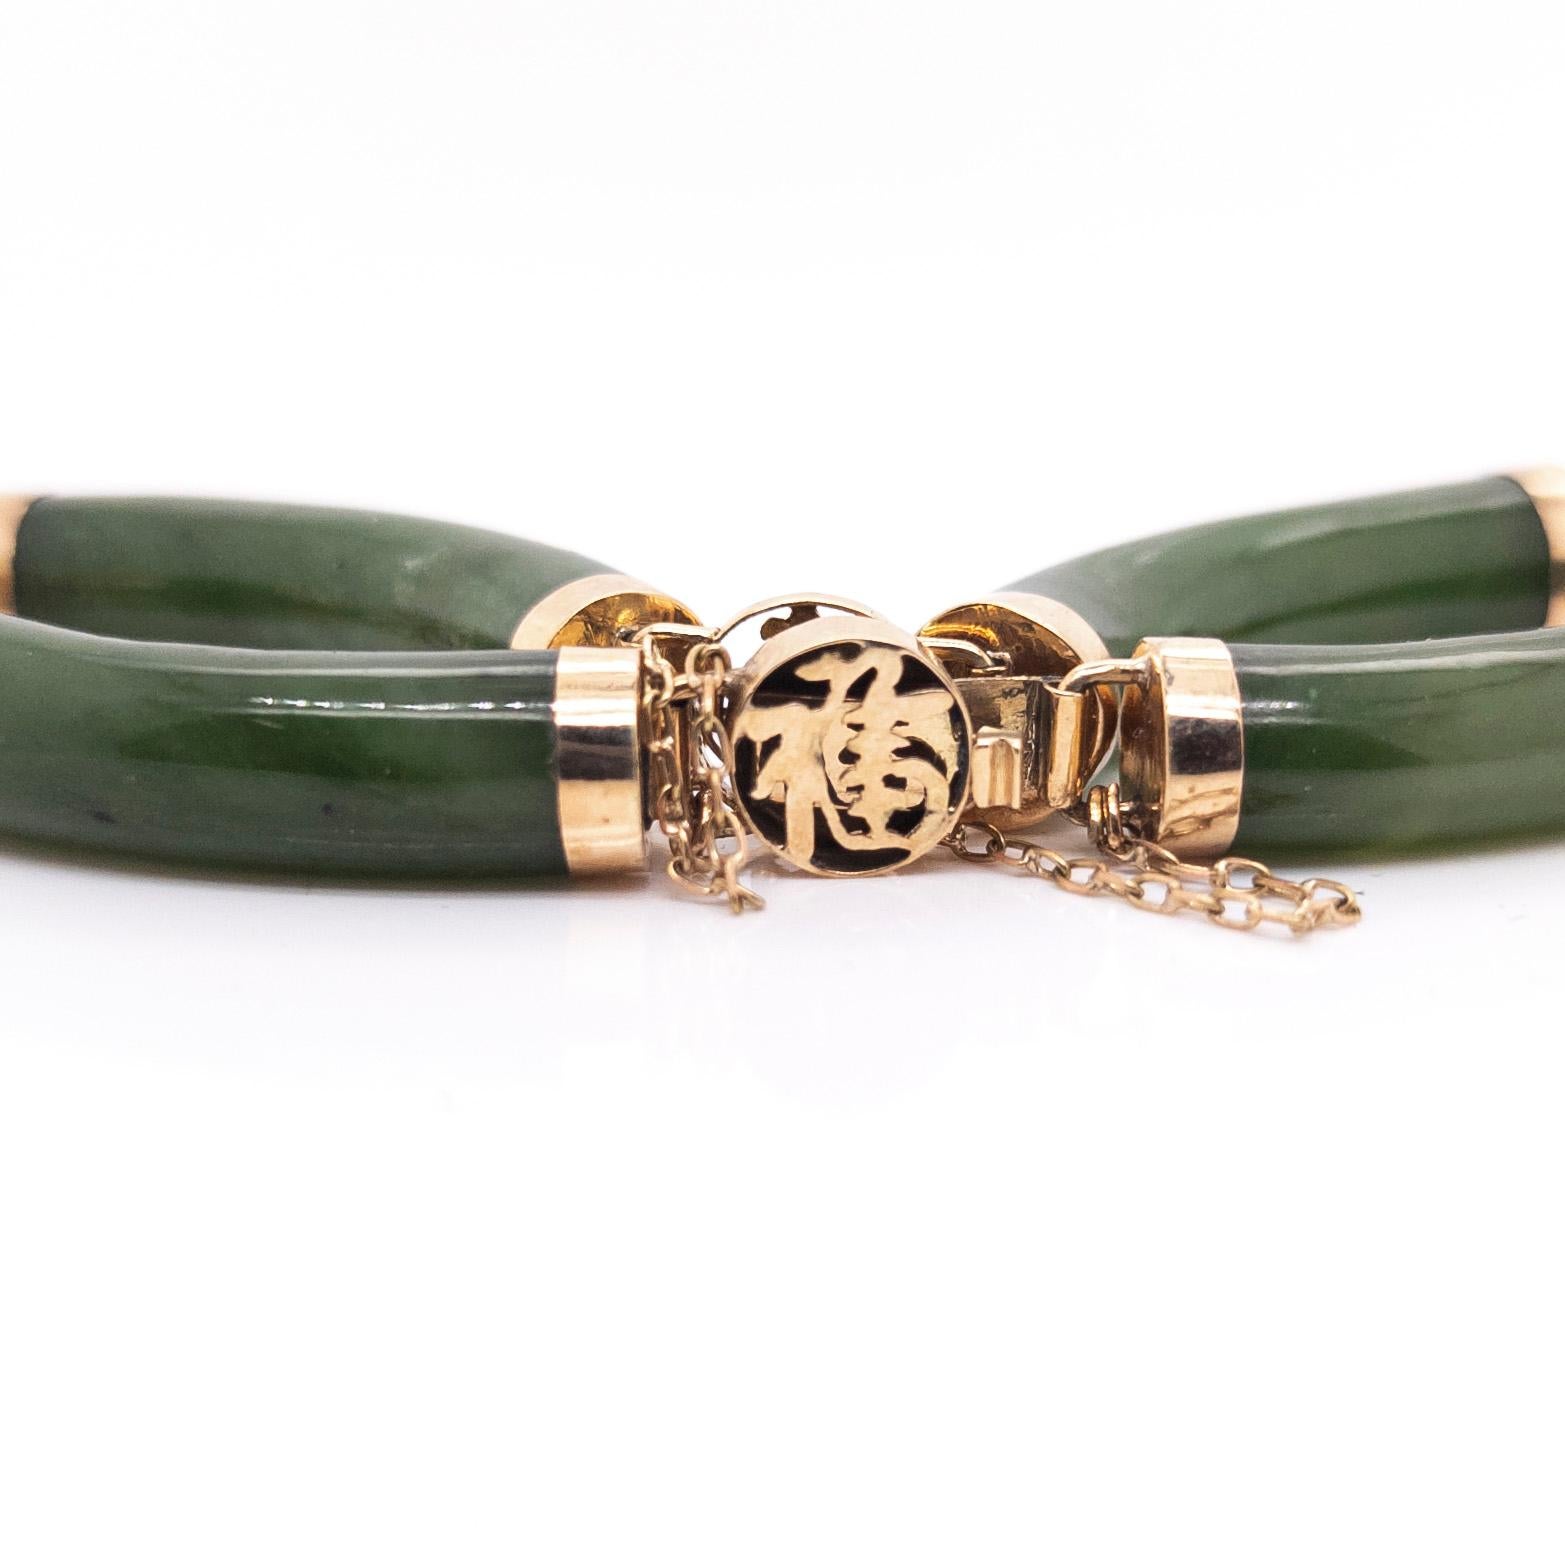 Vintage Chinese 14k Gold & Jade Bracelet with Auspicious Sanxing Characters For Sale 3